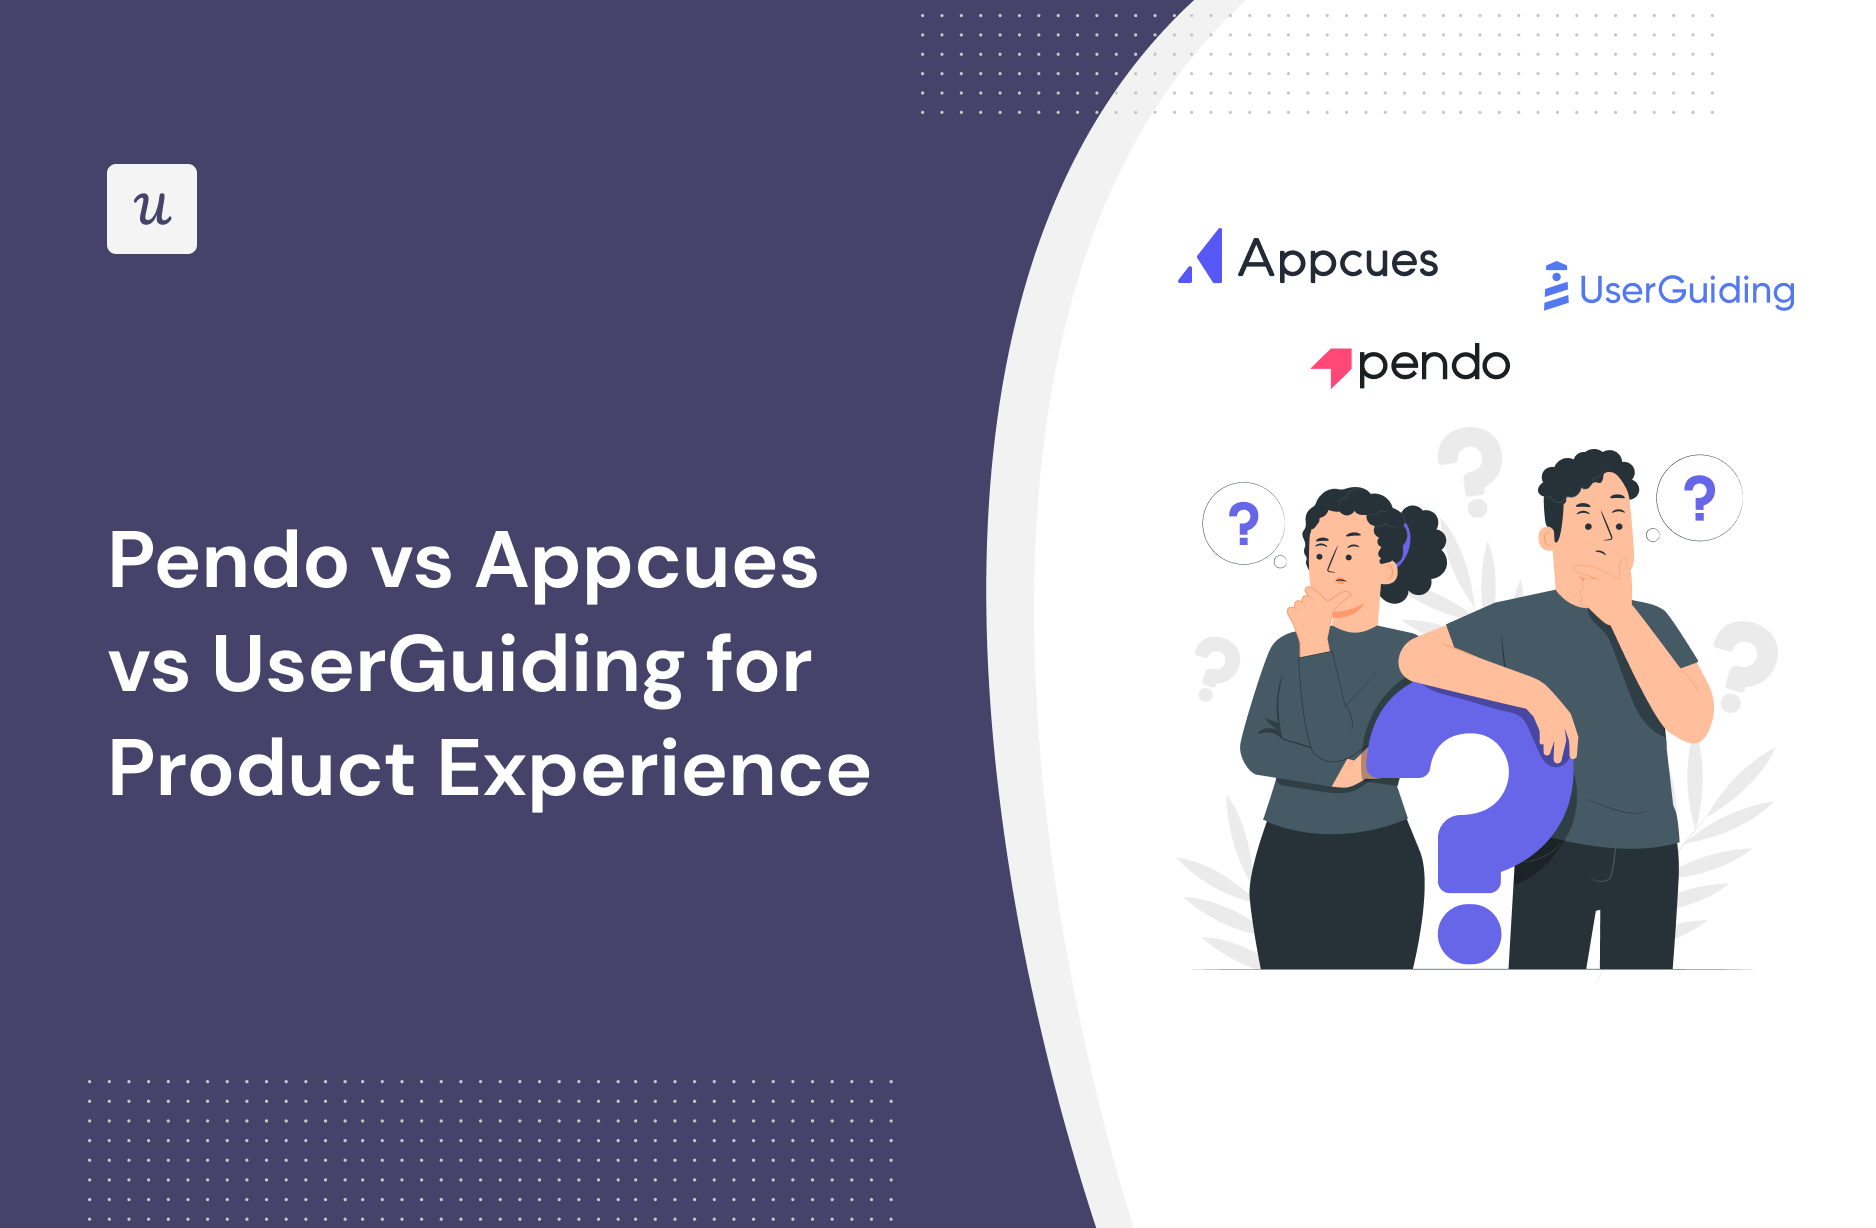 Pendo vs Appcues vs UserGuiding for Product Experience